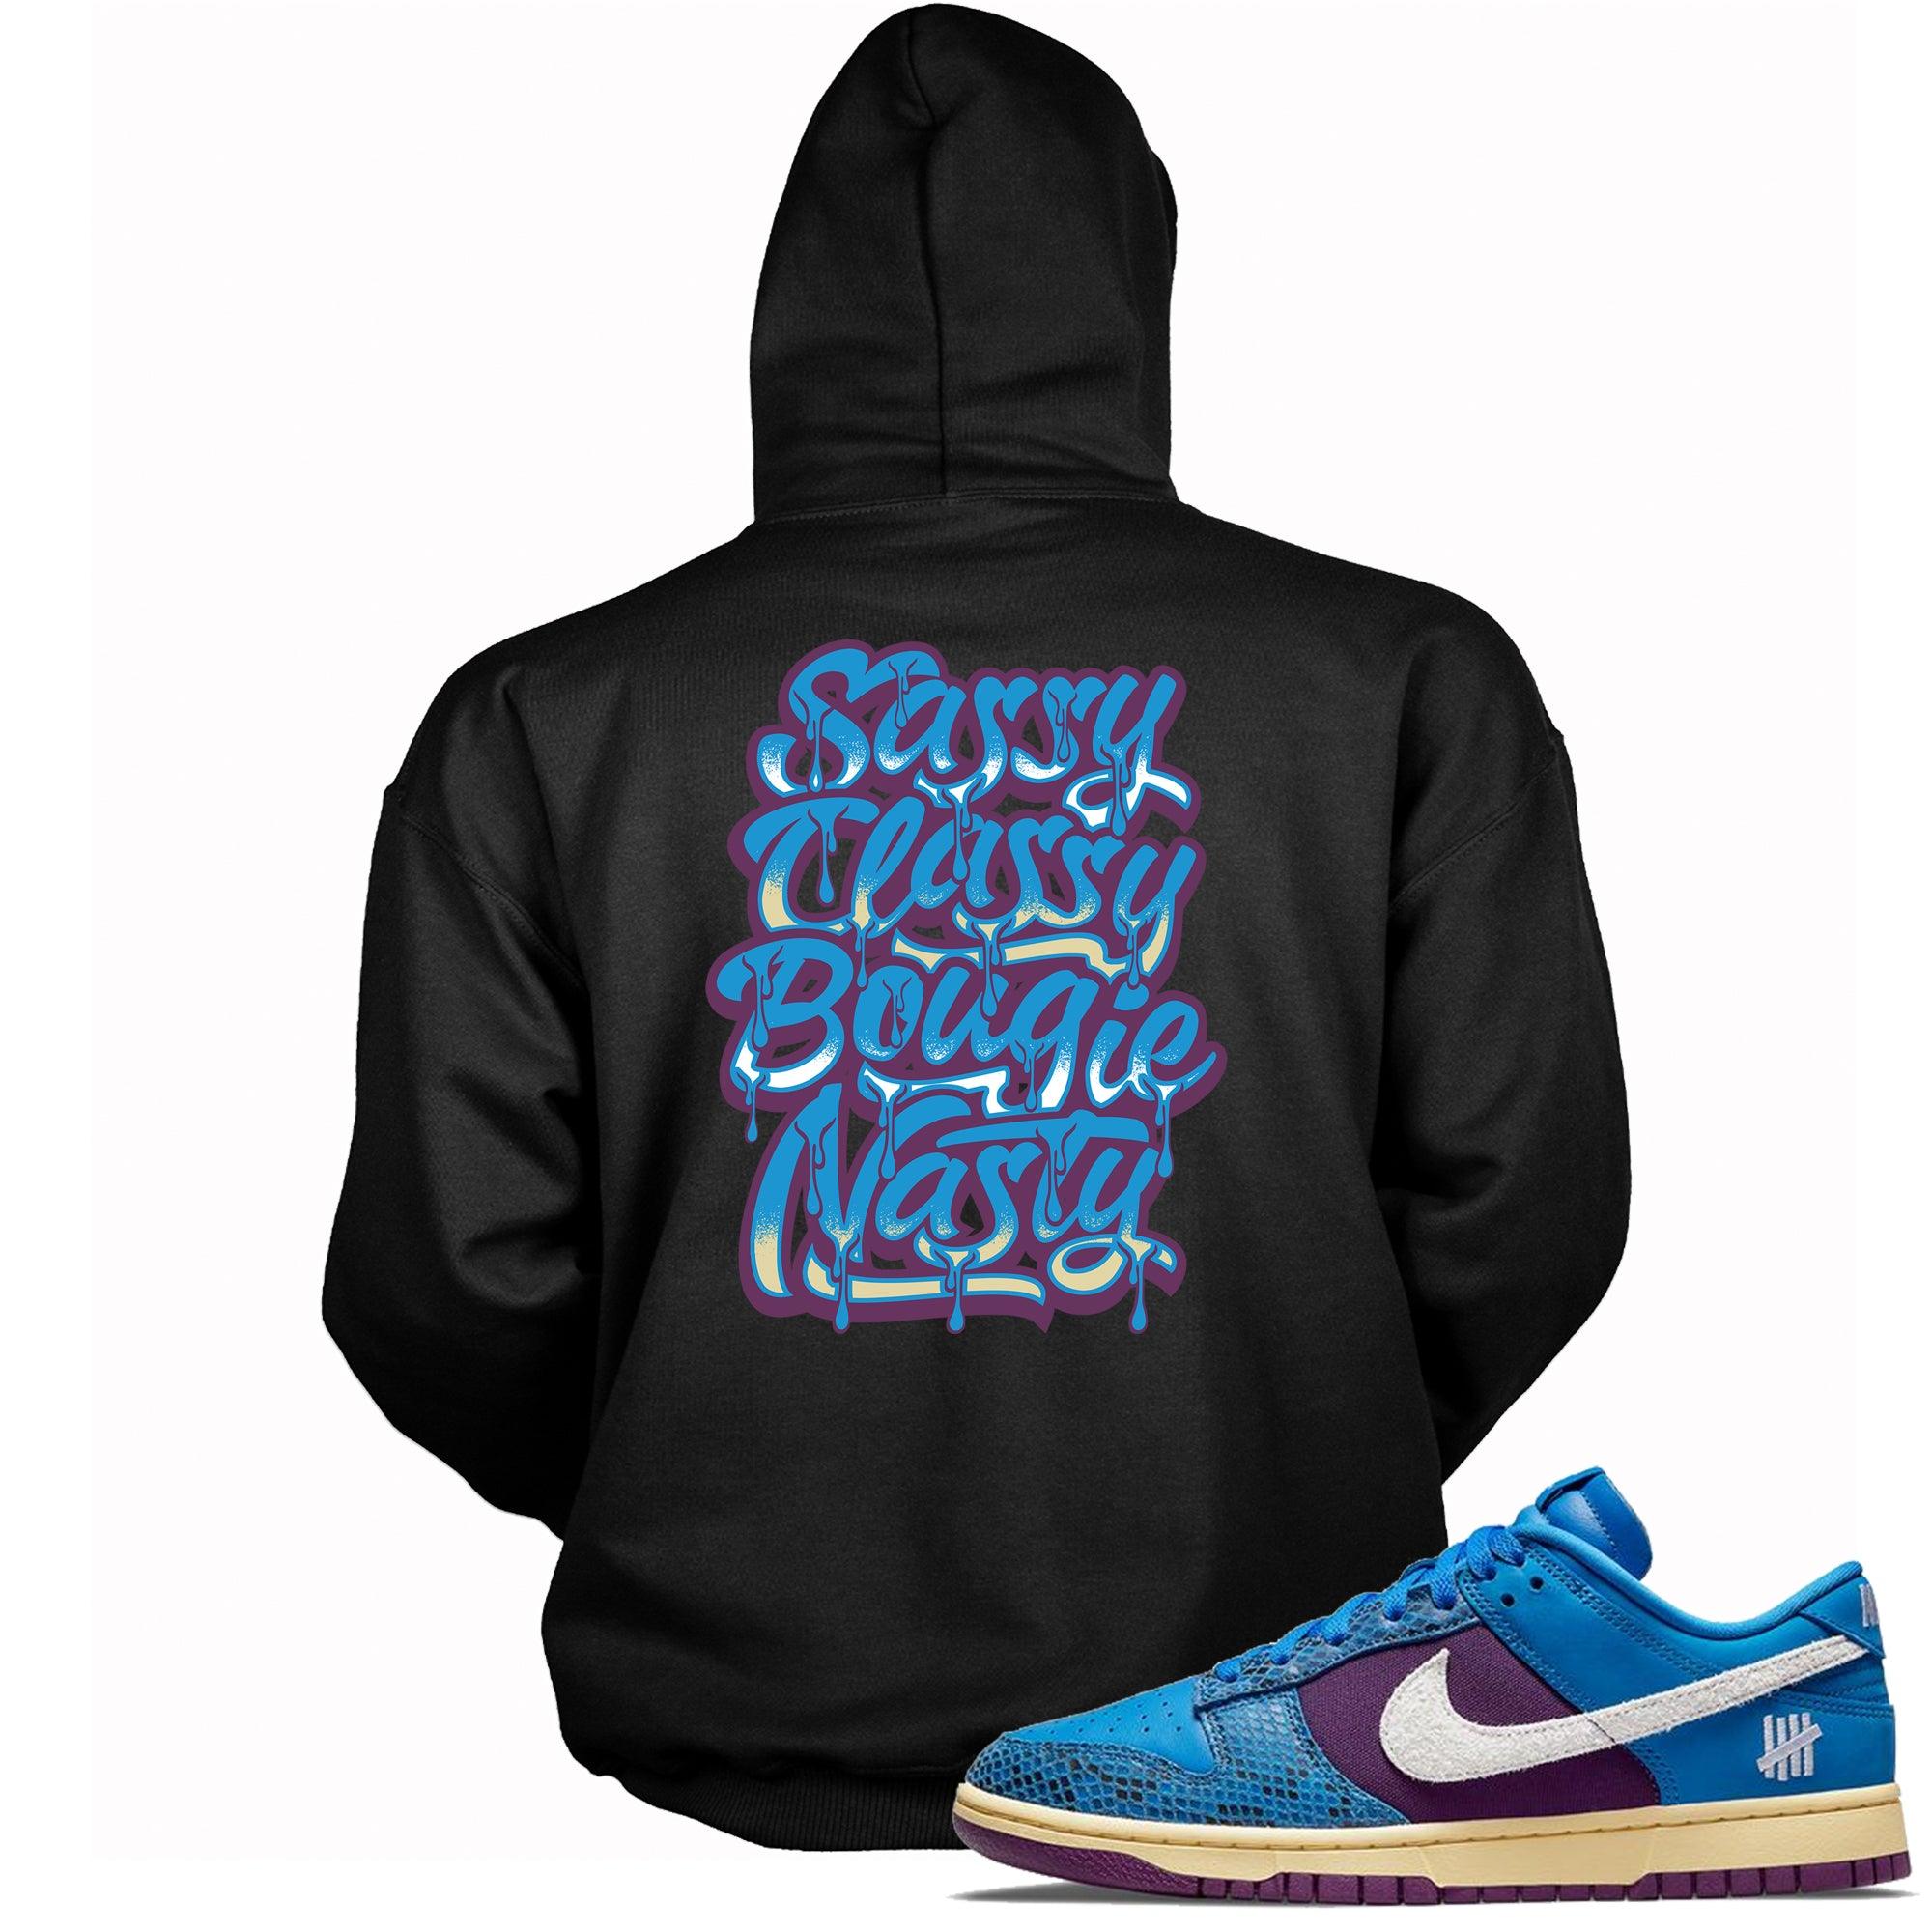 Sassy Classy Hoodie Nike Dunk Low Undefeated 5 On It Dunk vs AF1 photo